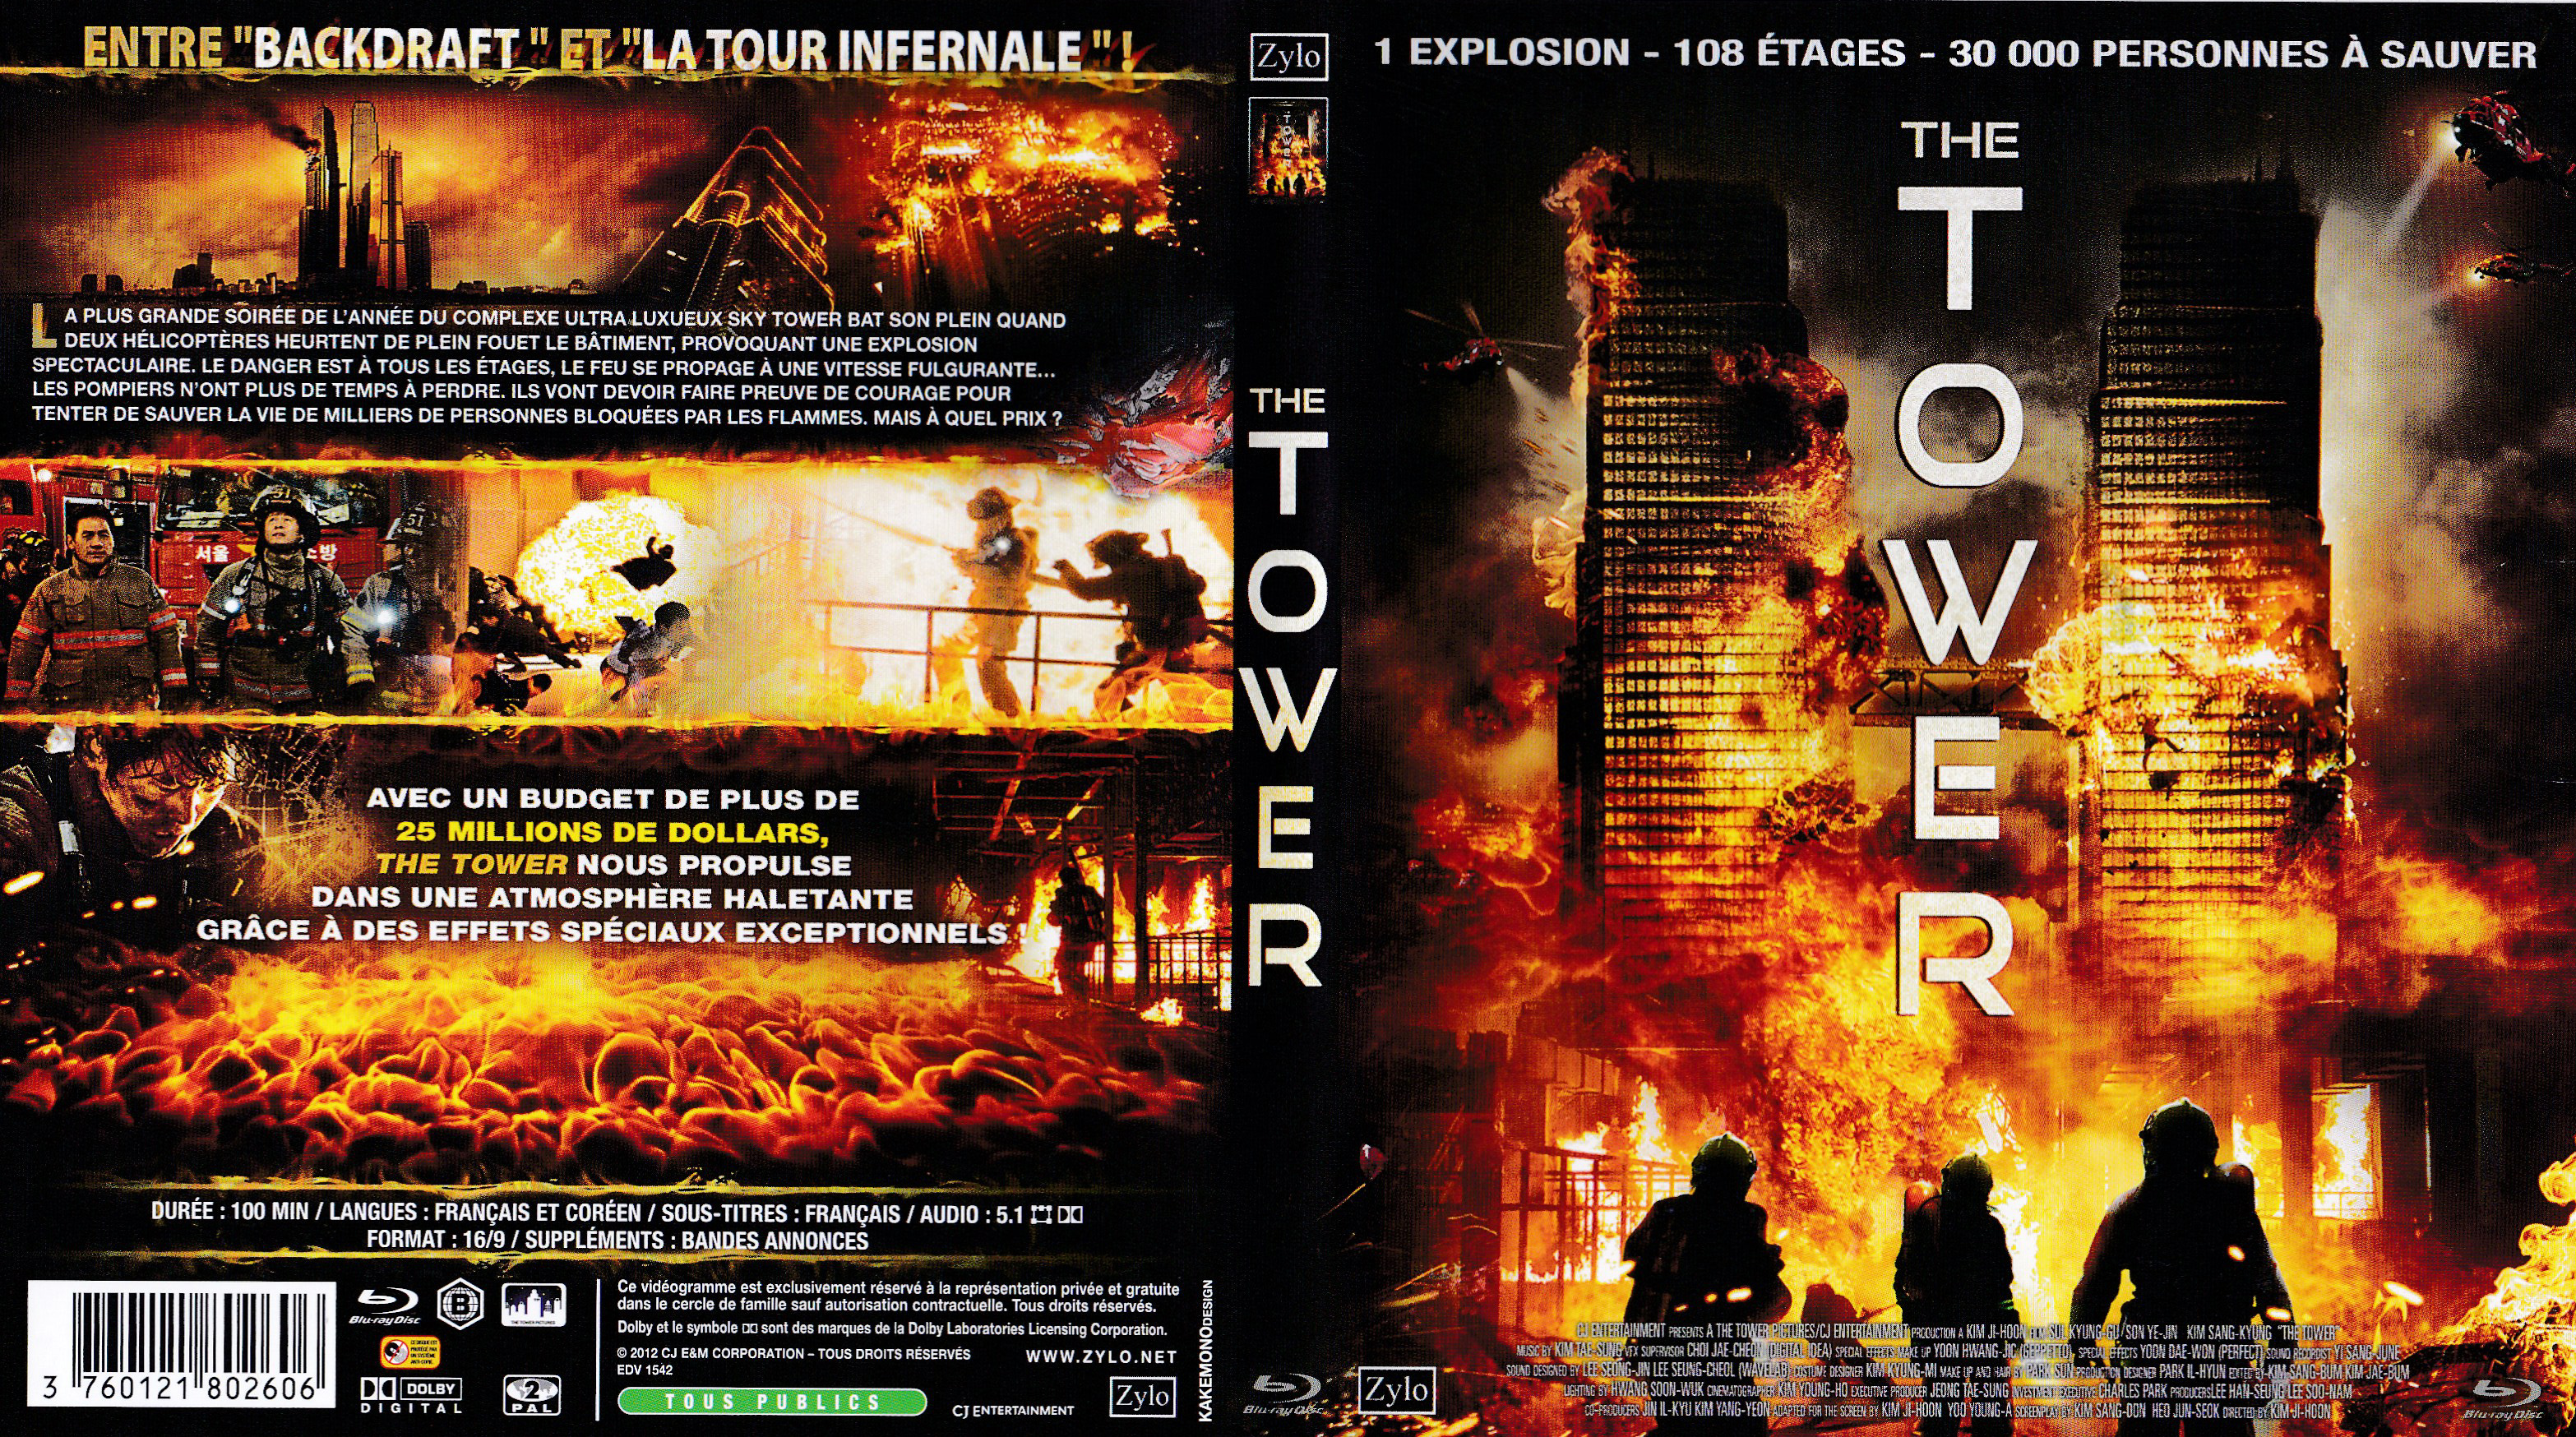 Jaquette DVD The tower (BLU-RAY)